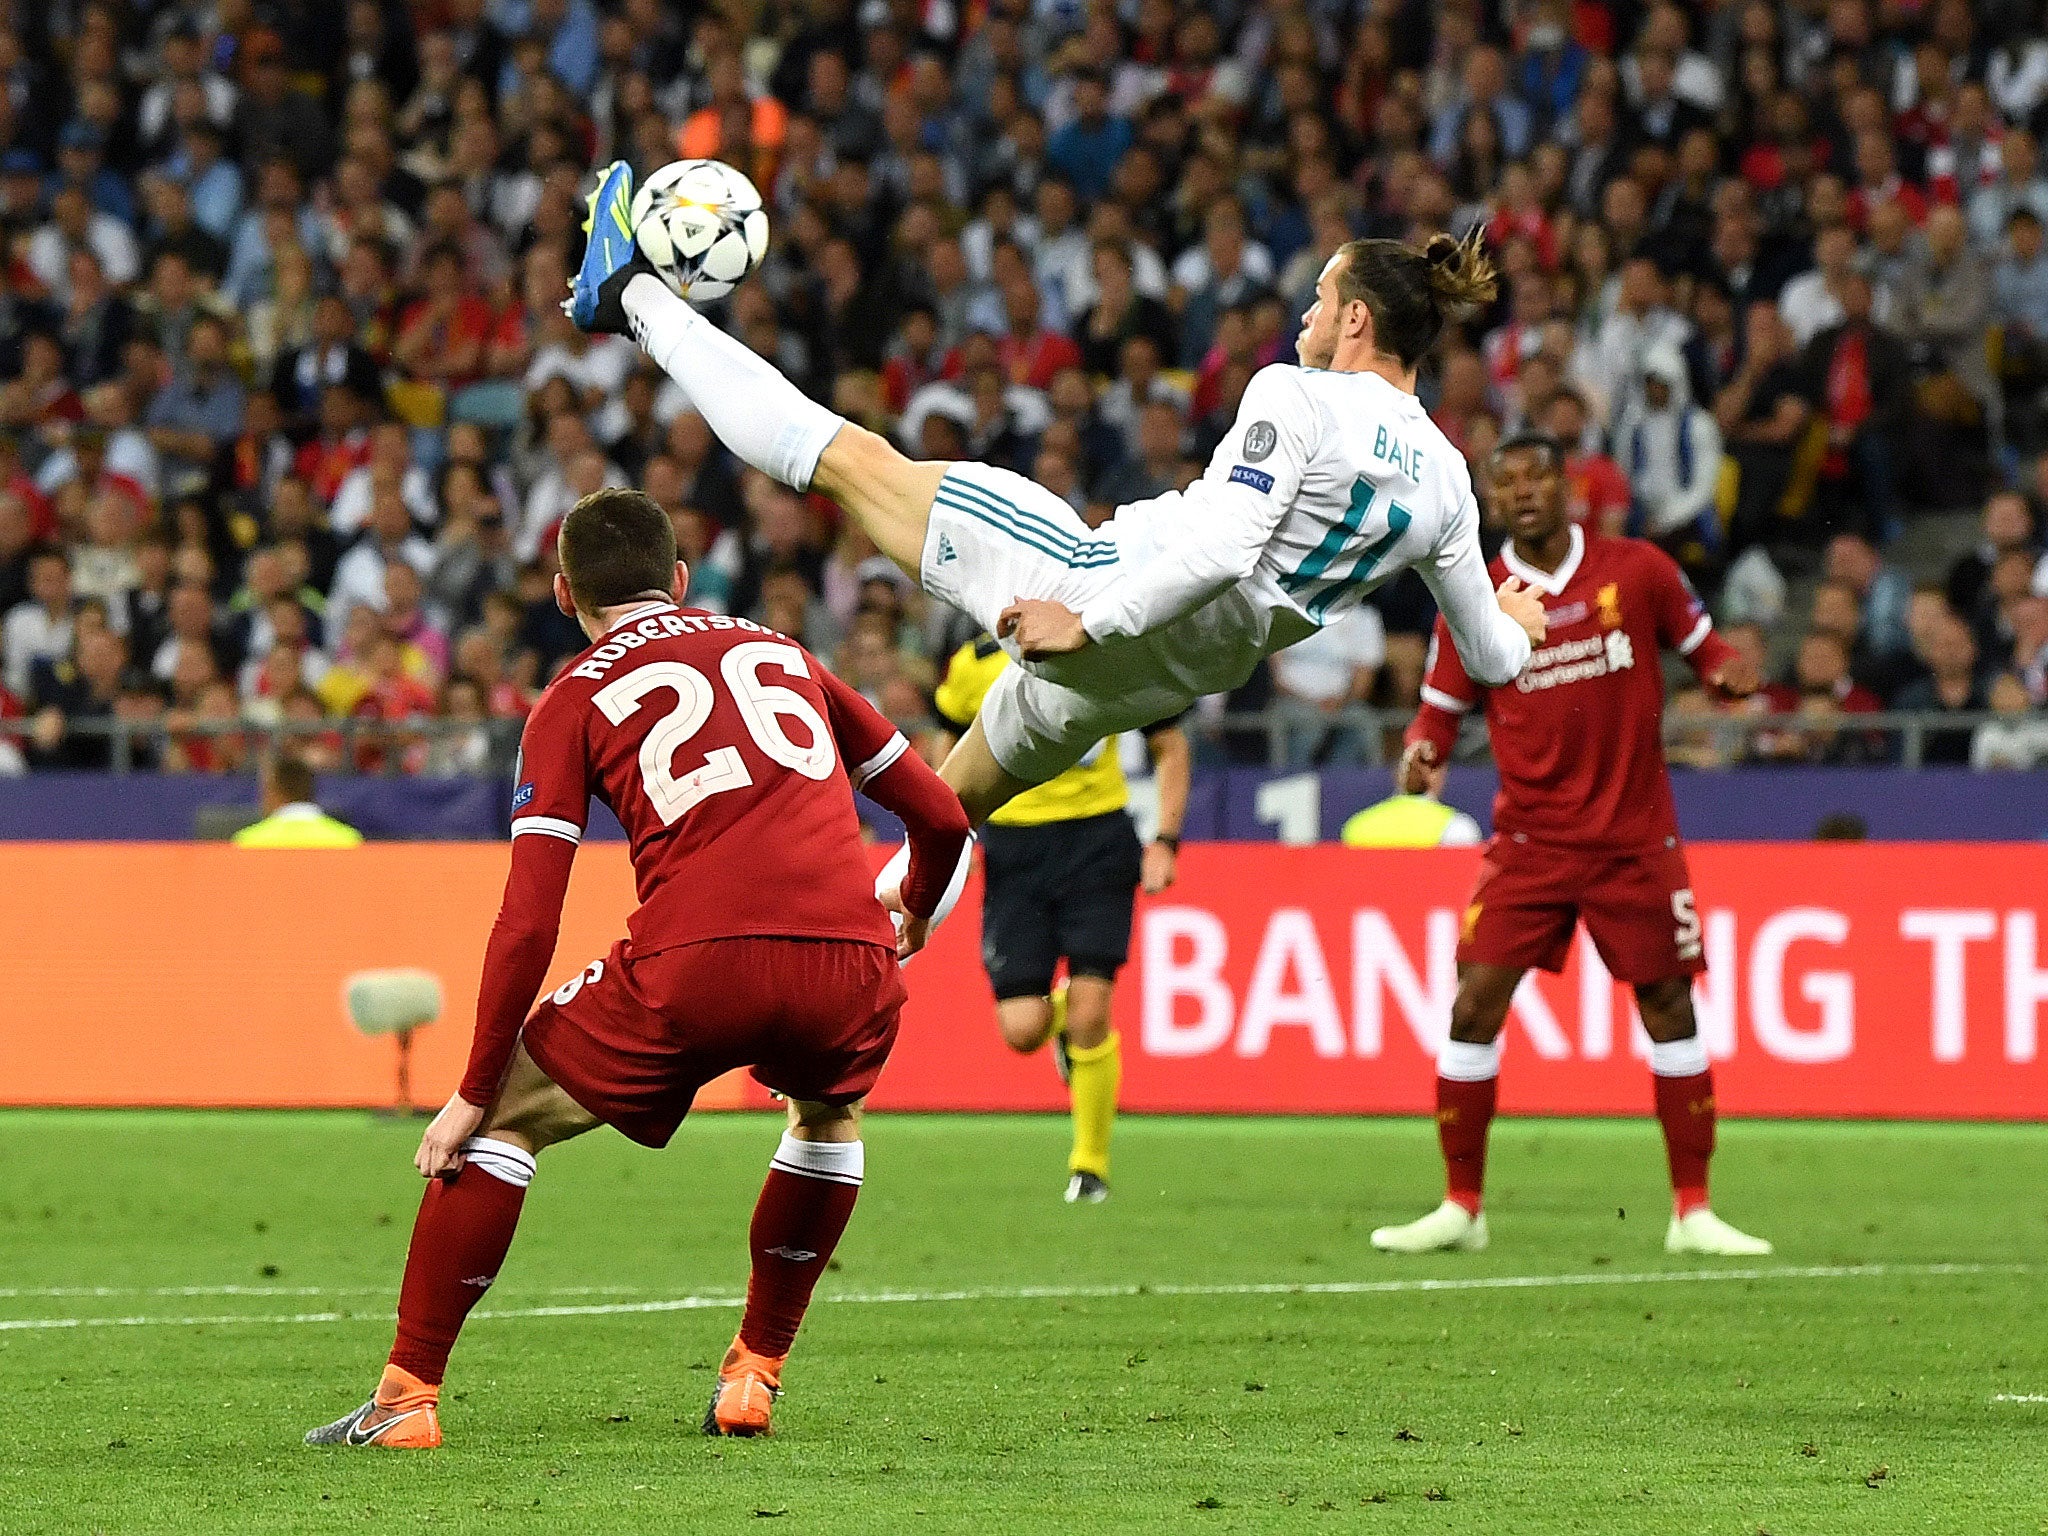 Cristiano Ronaldo, Lucy Bronze and Elliot Embleton up for Uefa award but Gareth Bale Champions League goal snubbed